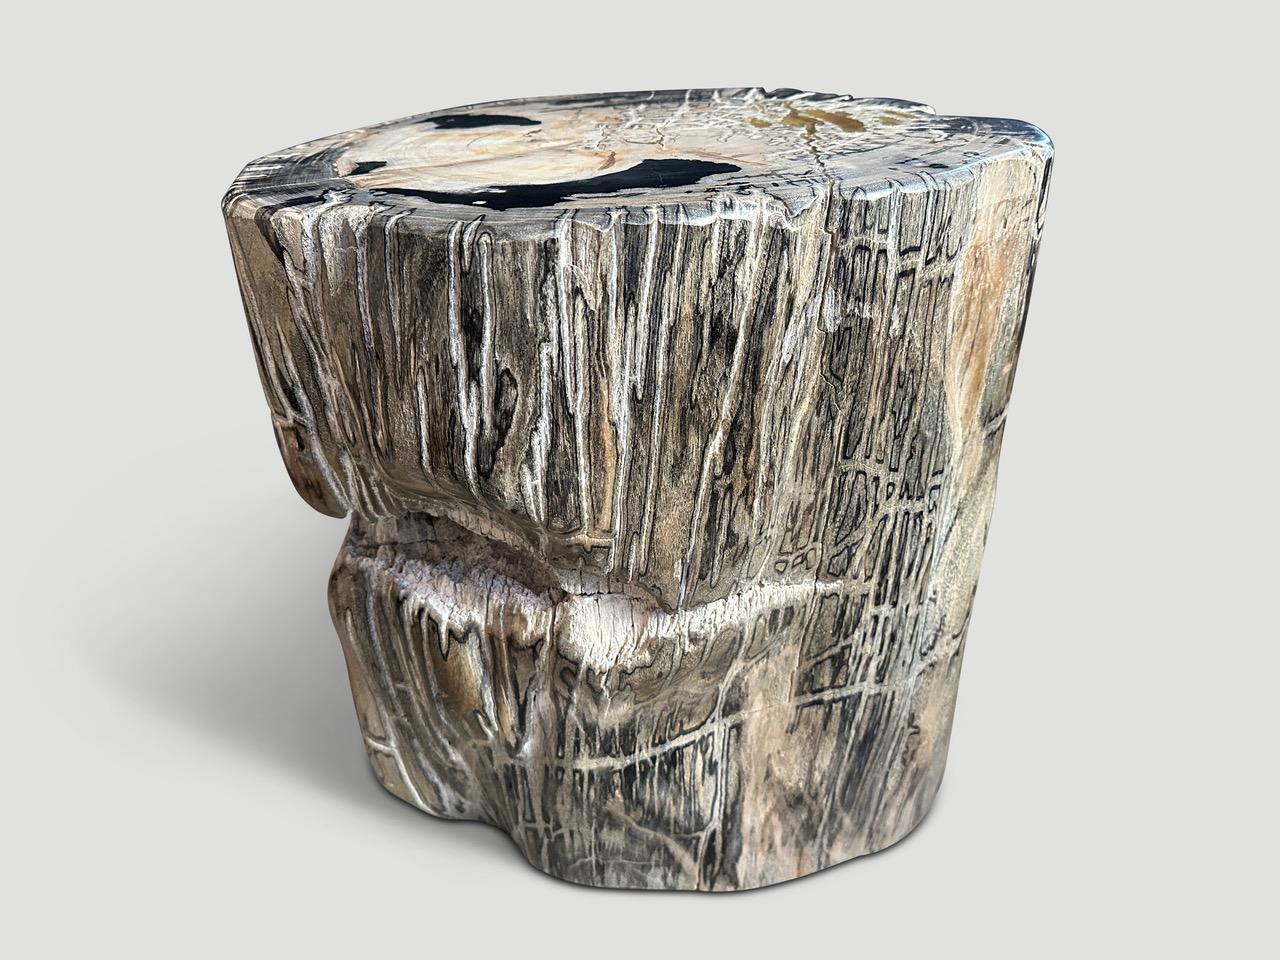 Beautiful contrasting tones and textures on this ancient petrified wood side table. Rare. It’s fascinating how Mother Nature produces these exquisite 40 million year old petrified teak logs with such contrasting colors and natural patterns